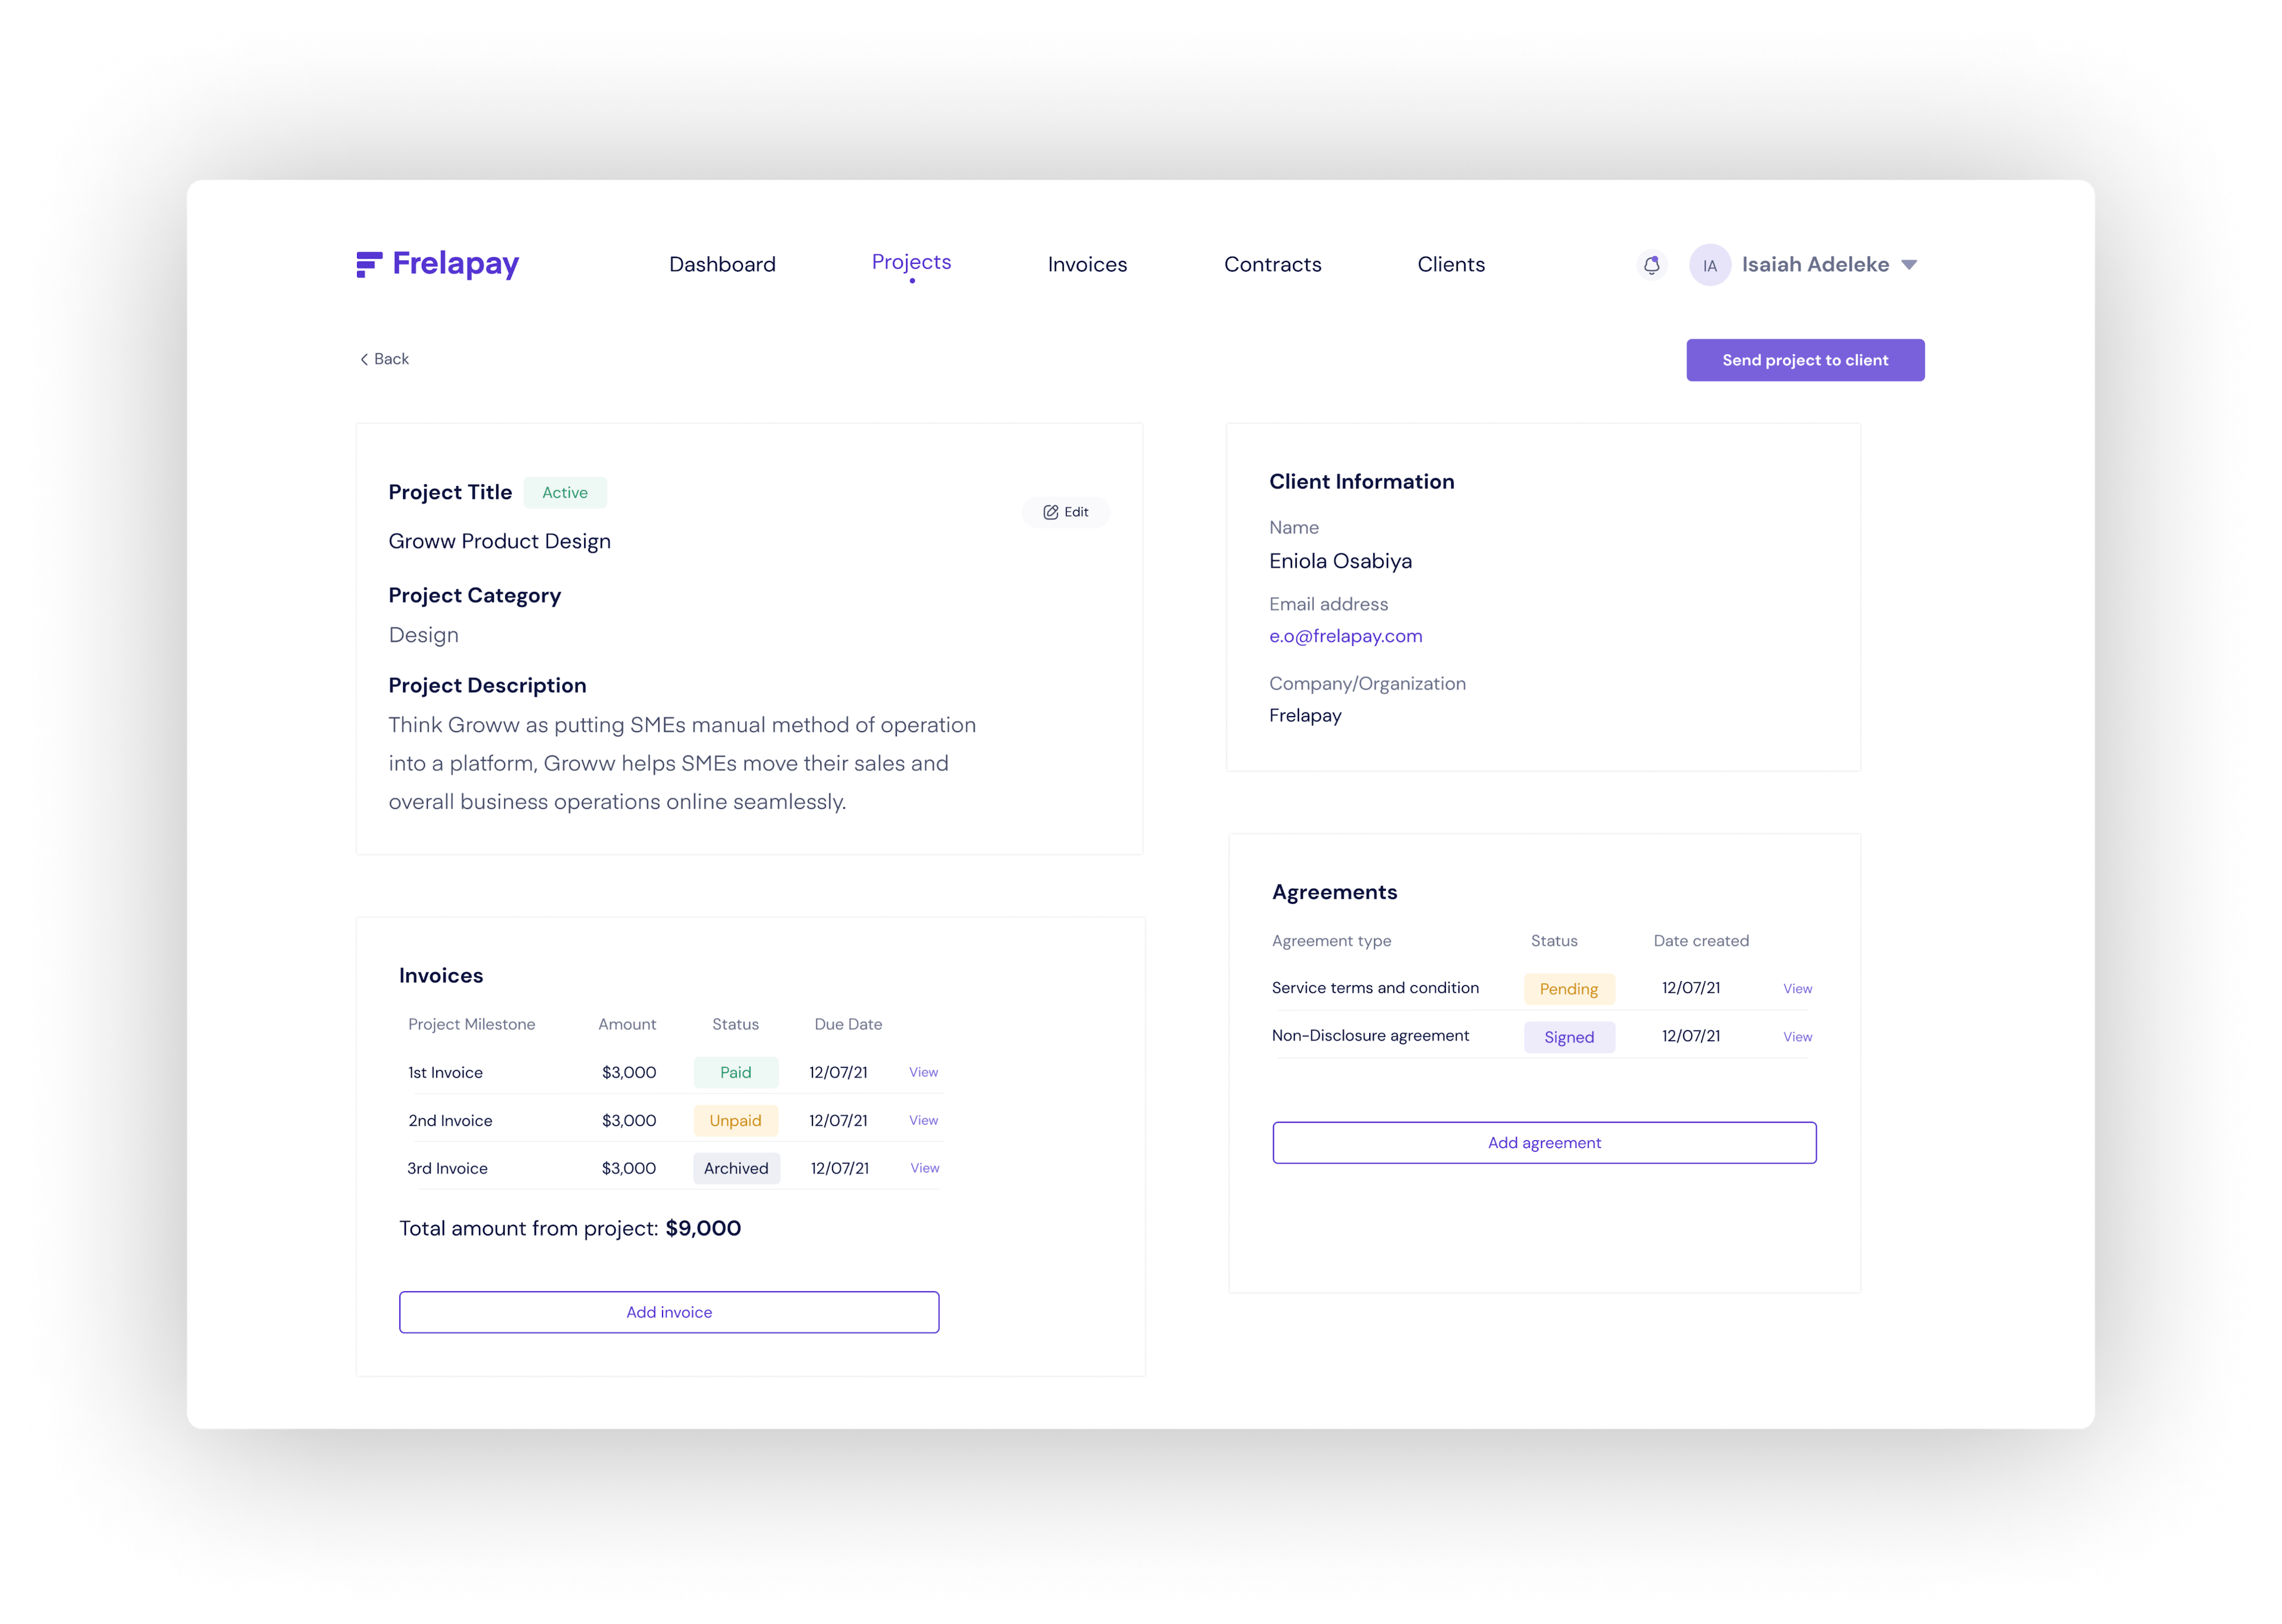 frelapay-dashboard-preview